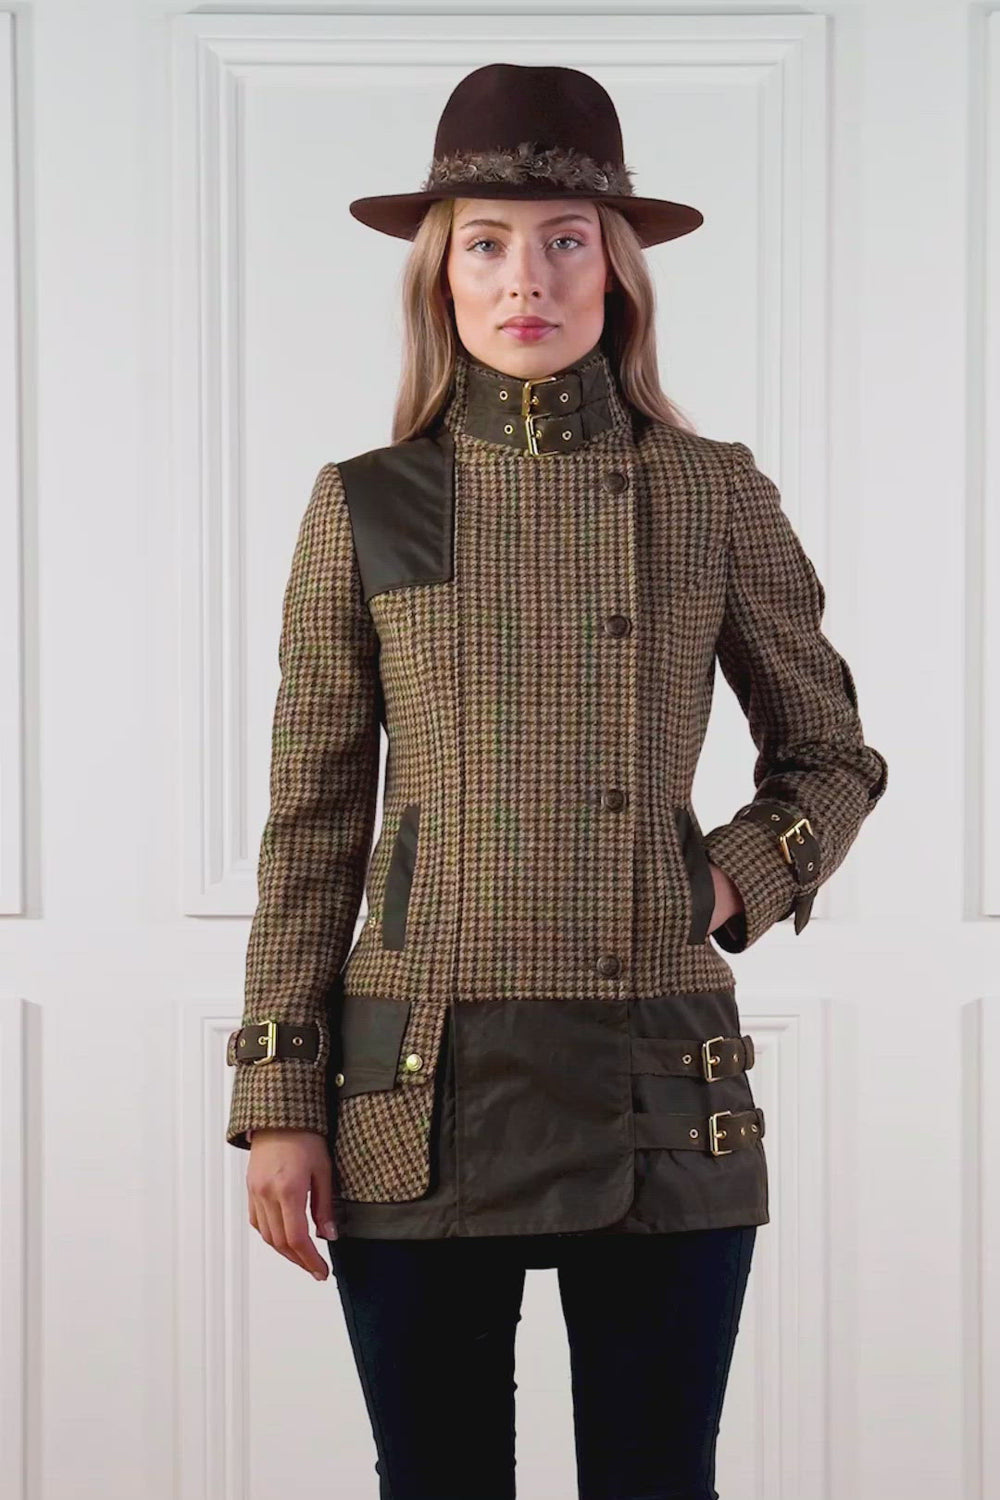 womens fitted field jacket in stone brown and green houndstooth tweed trimmed with contrast chocolate Millerain Wax fabric on shoulder across back and on the hip finished with horn button fastenings an buckles on the collar cuffs and hip